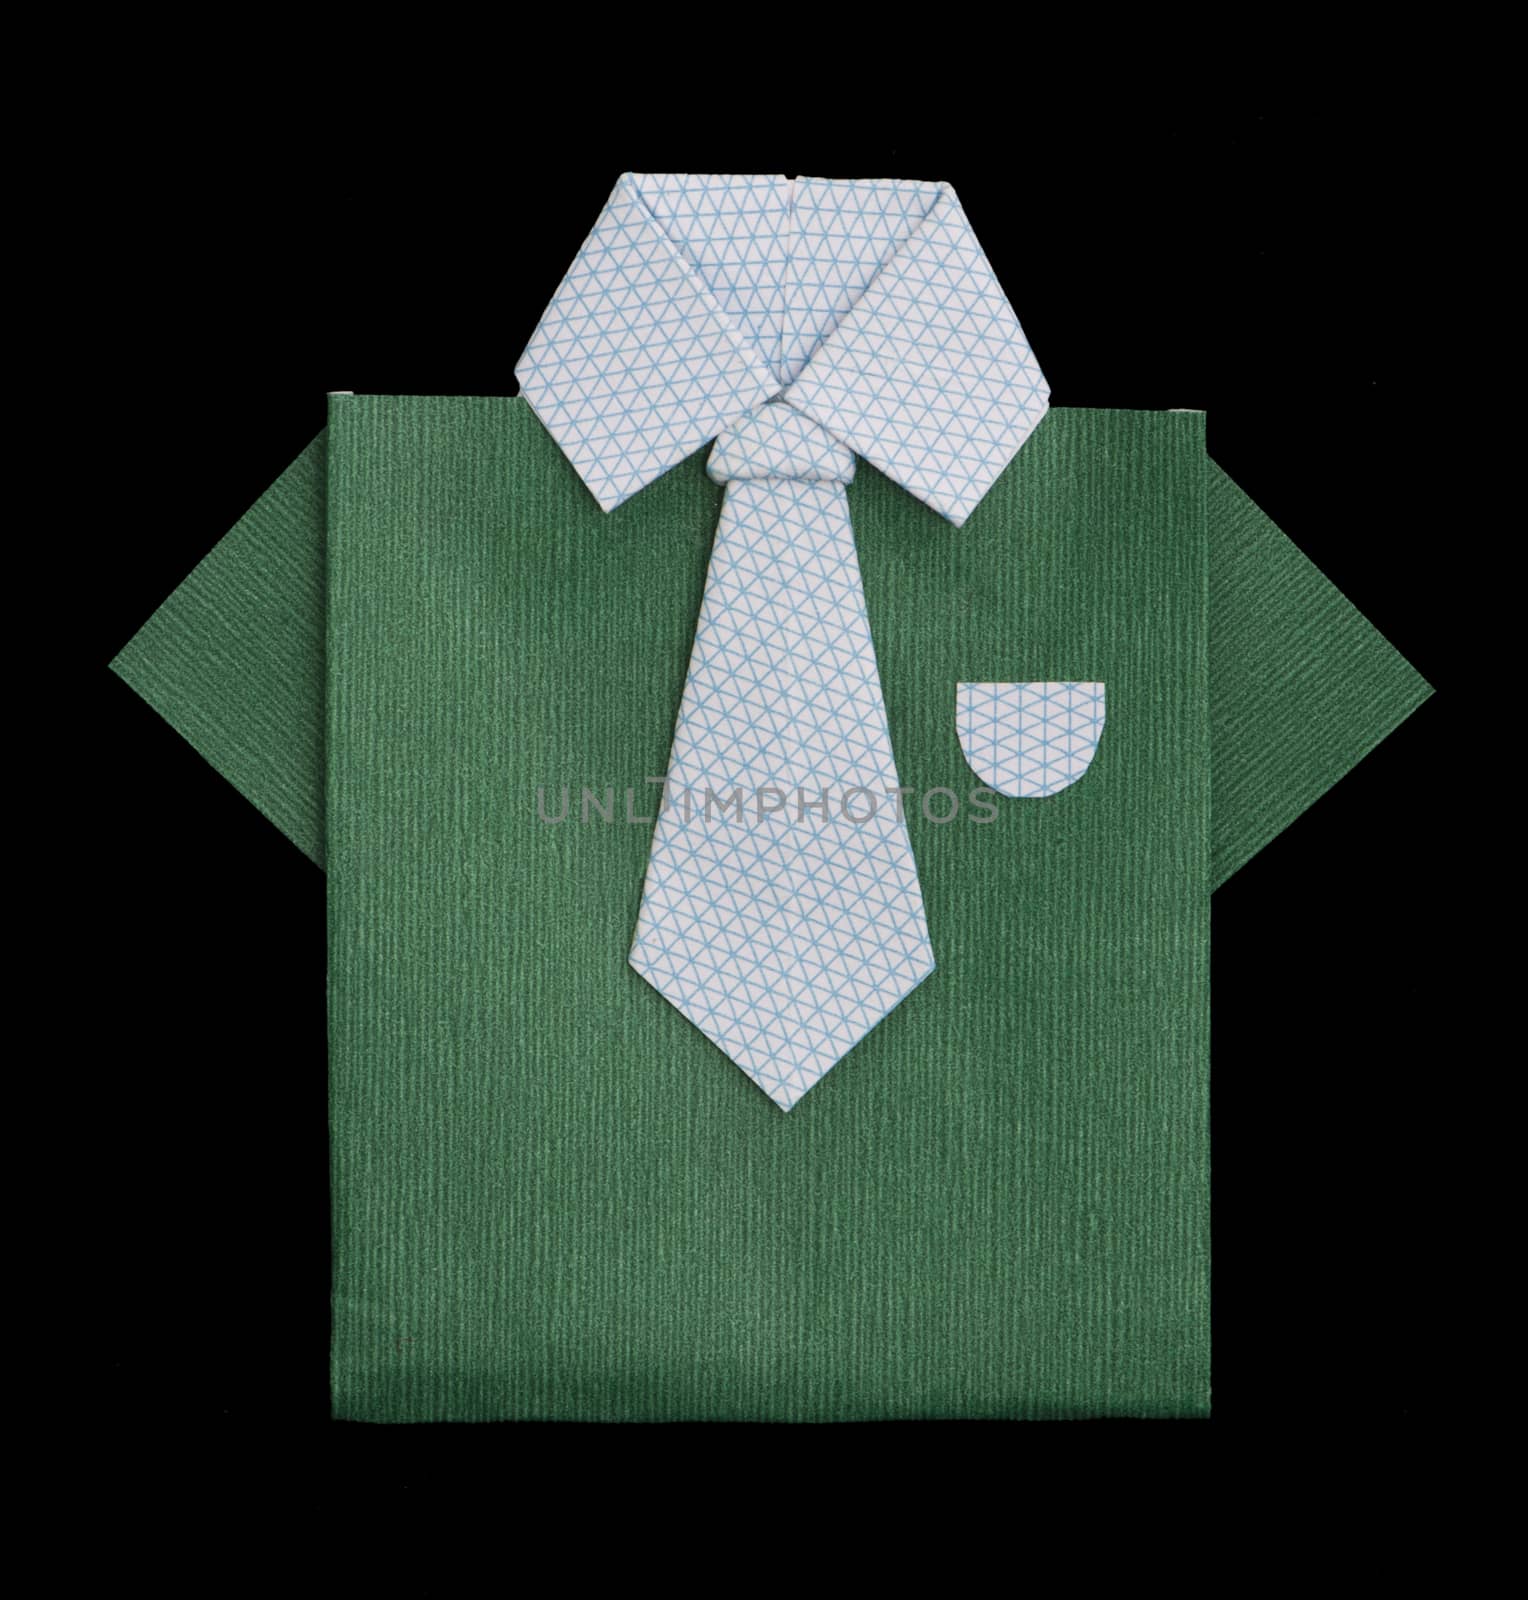 Isolated paper made green shirt with white tie.Folded origami style